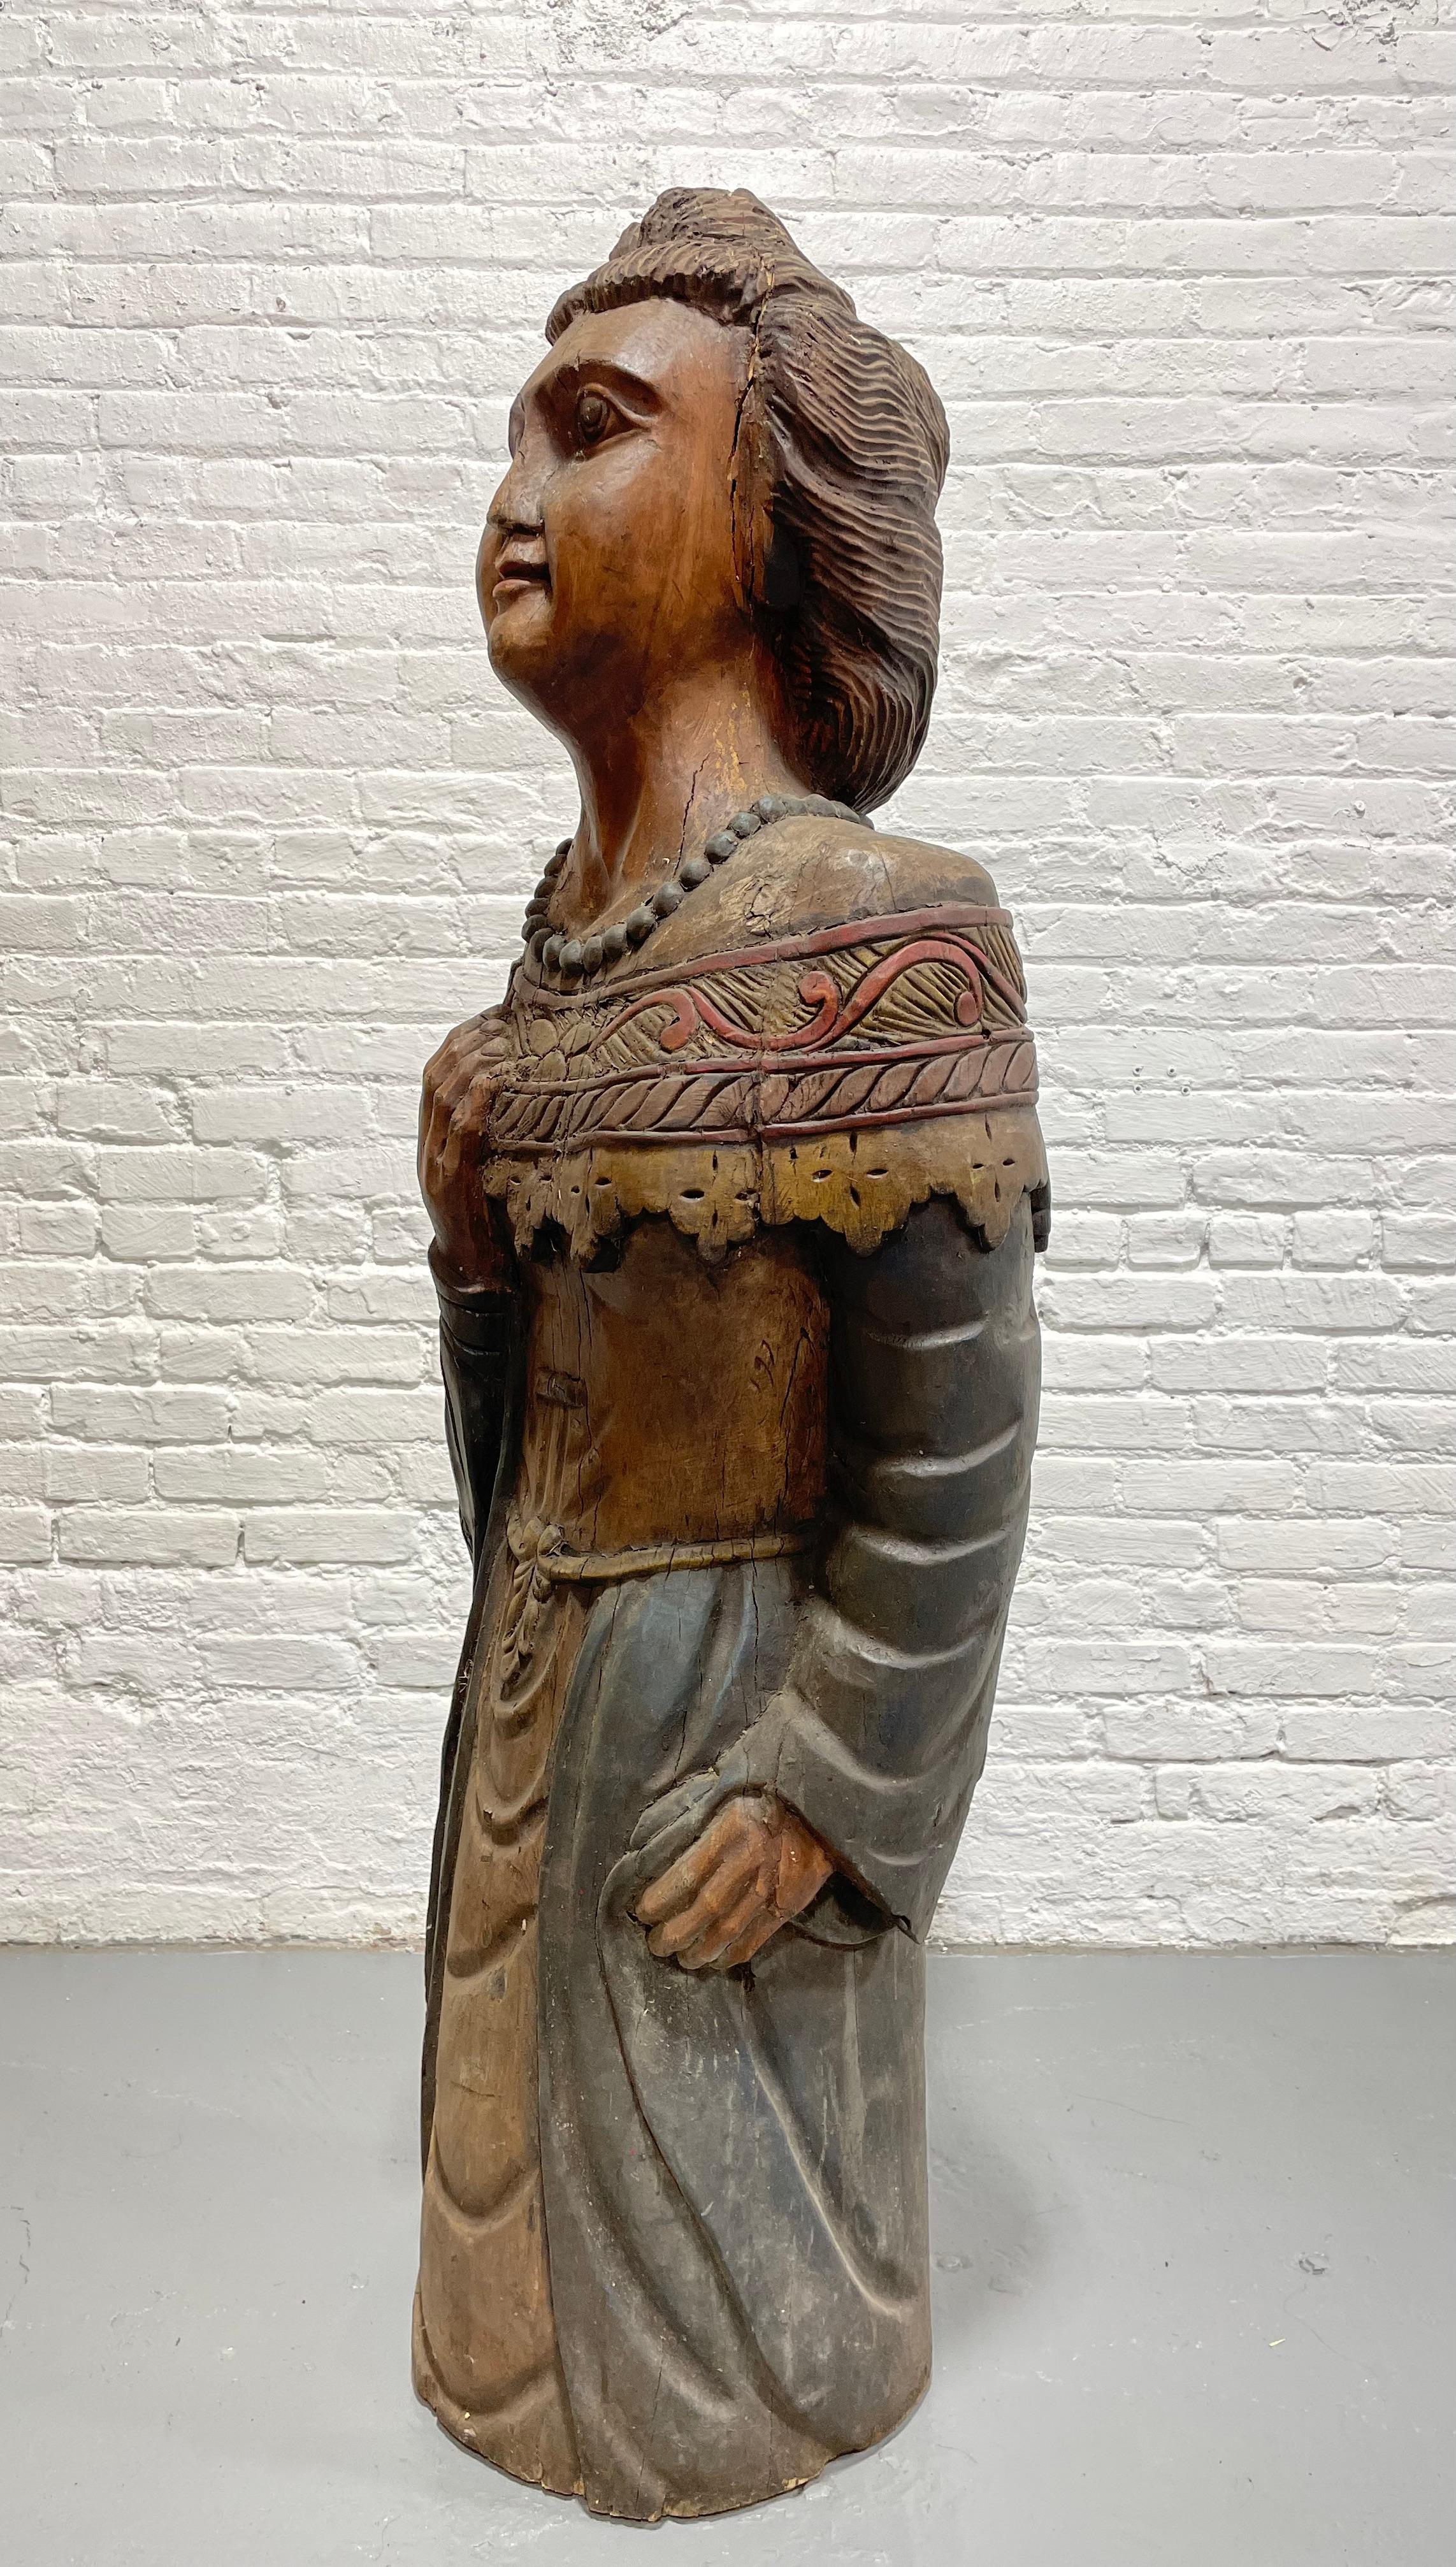 Rare life size hand carved wooden woman figure / statue. Beautifully and intricately hand carved from solid wood. Original painted surface over a thin layer of gesso. Wonderful detailing – pearl necklace, bun hairstyle, and intricate outfit.